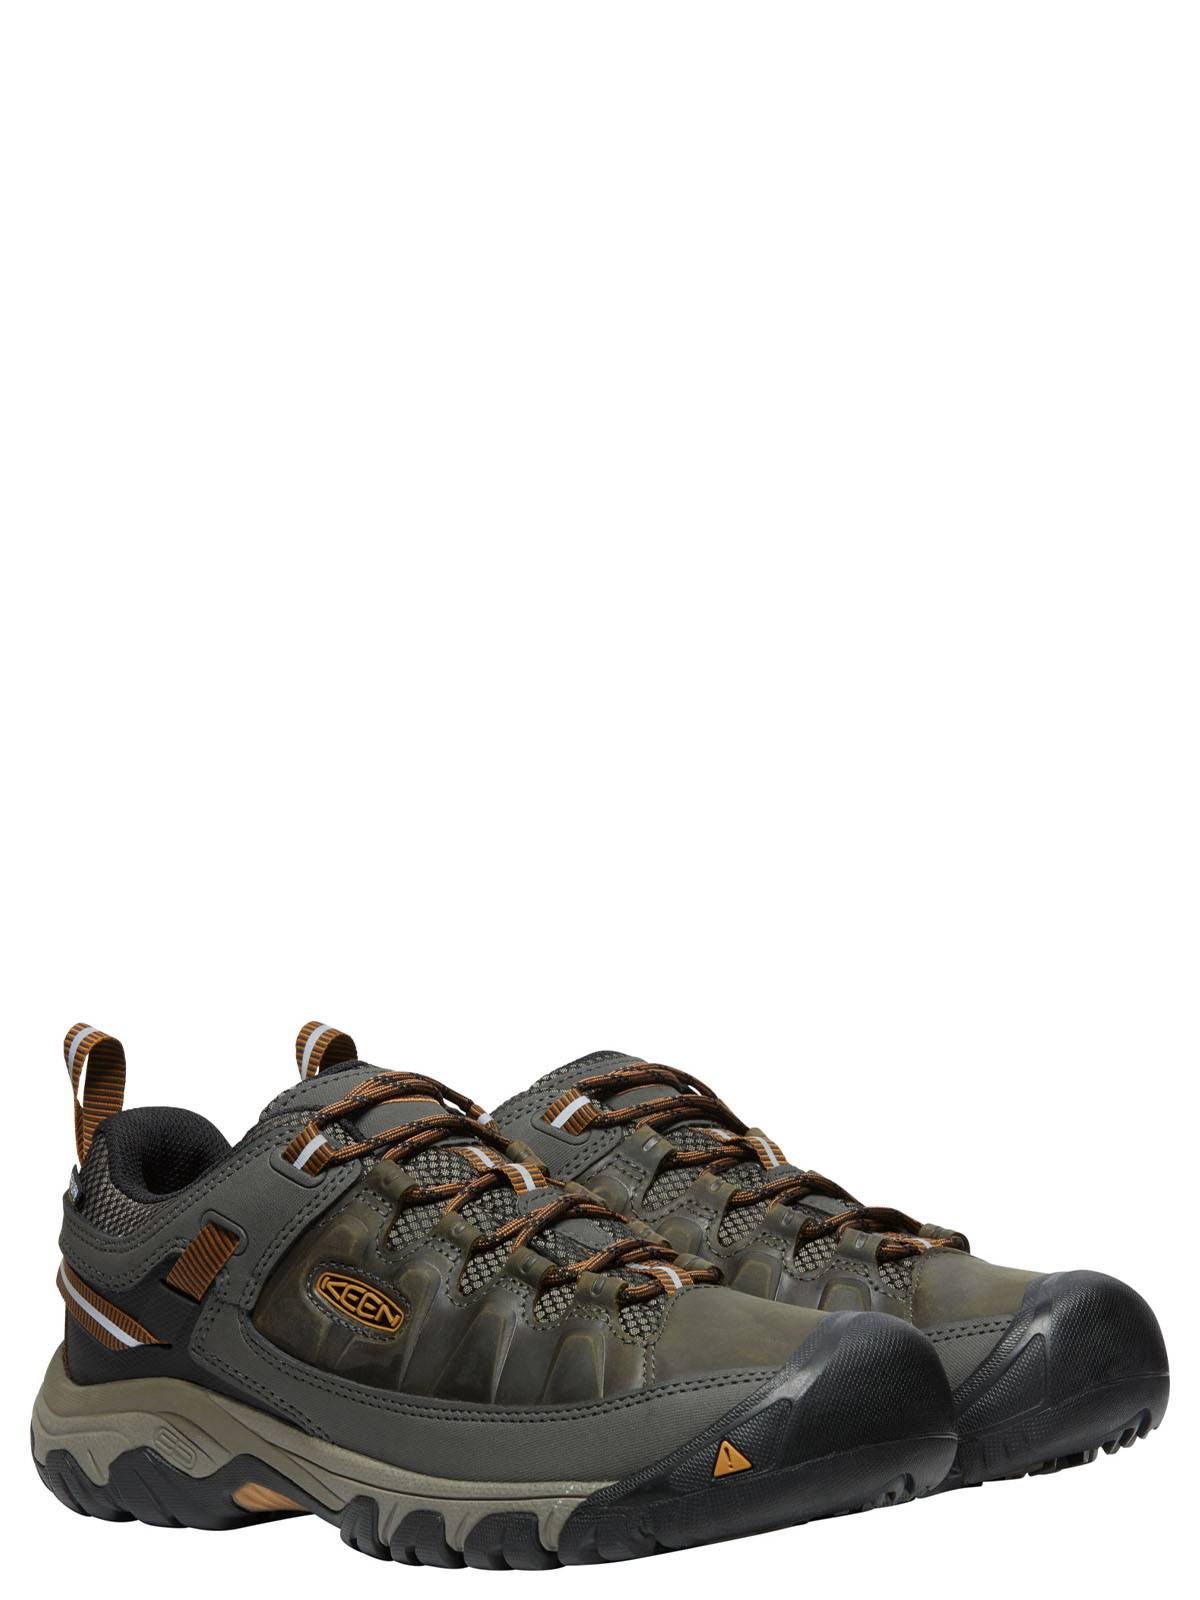 Chaussures imperméable pour homme Targhee III